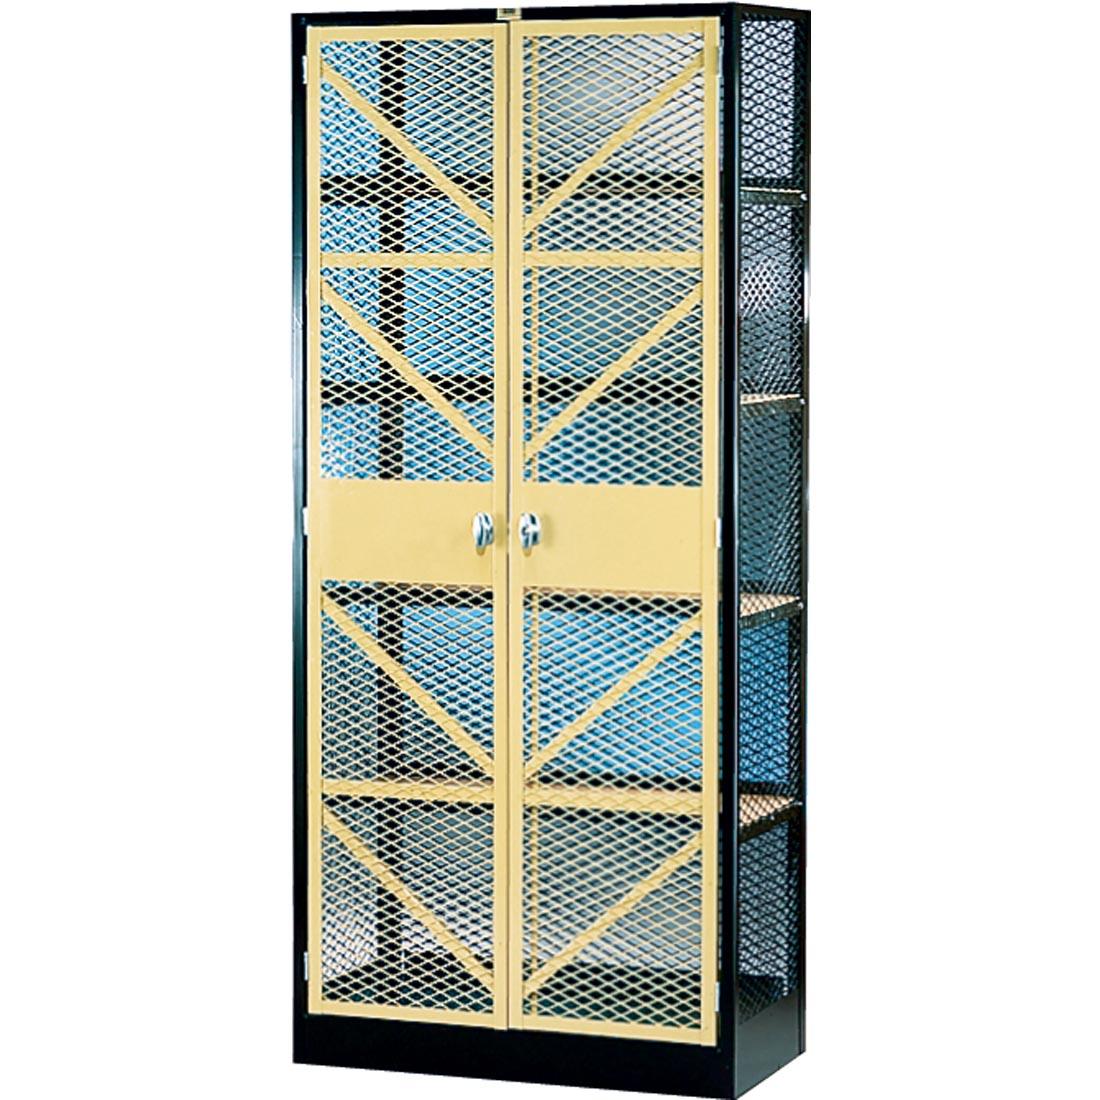 Debcor Large Drying Cabinet with Steel Mesh Walls